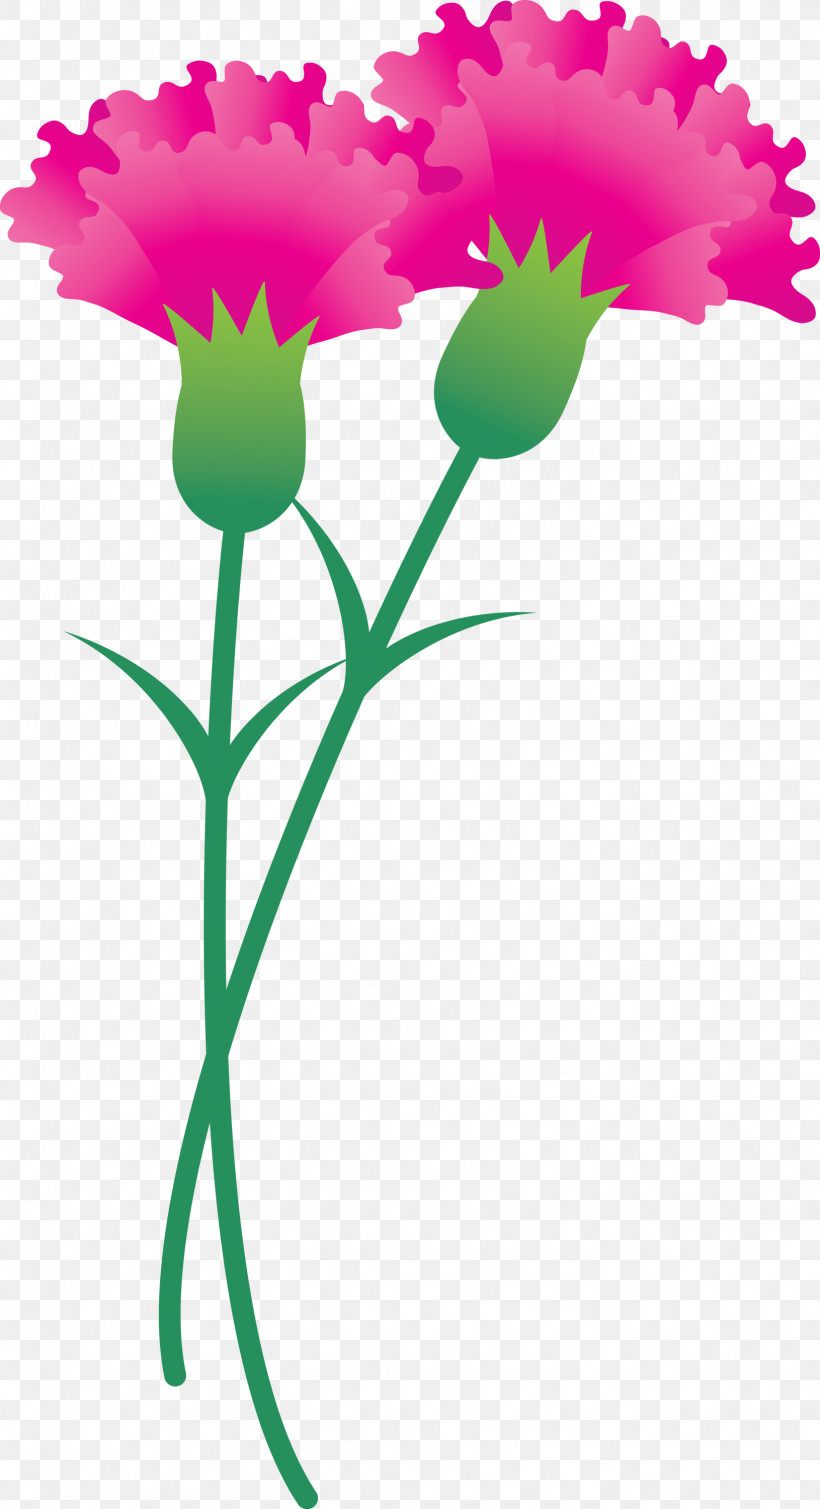 Mothers Day Carnation Mothers Day Flower, PNG, 1630x3000px, Mothers Day Carnation, Cut Flowers, Dianthus, Flower, Mothers Day Flower Download Free